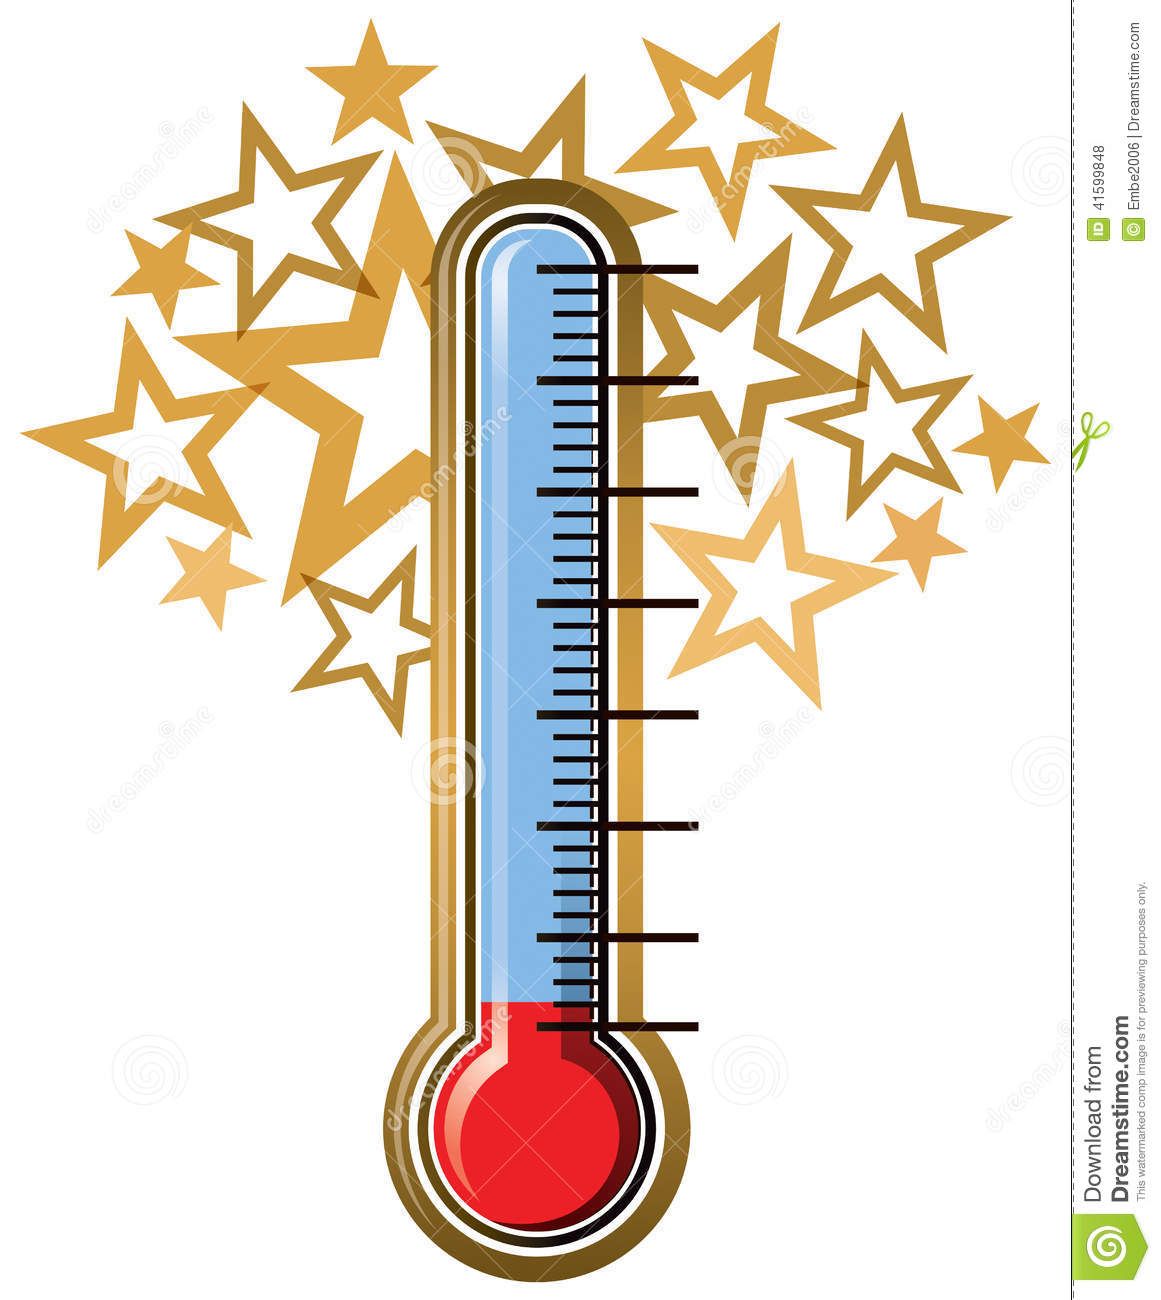 Thermometer goal download.